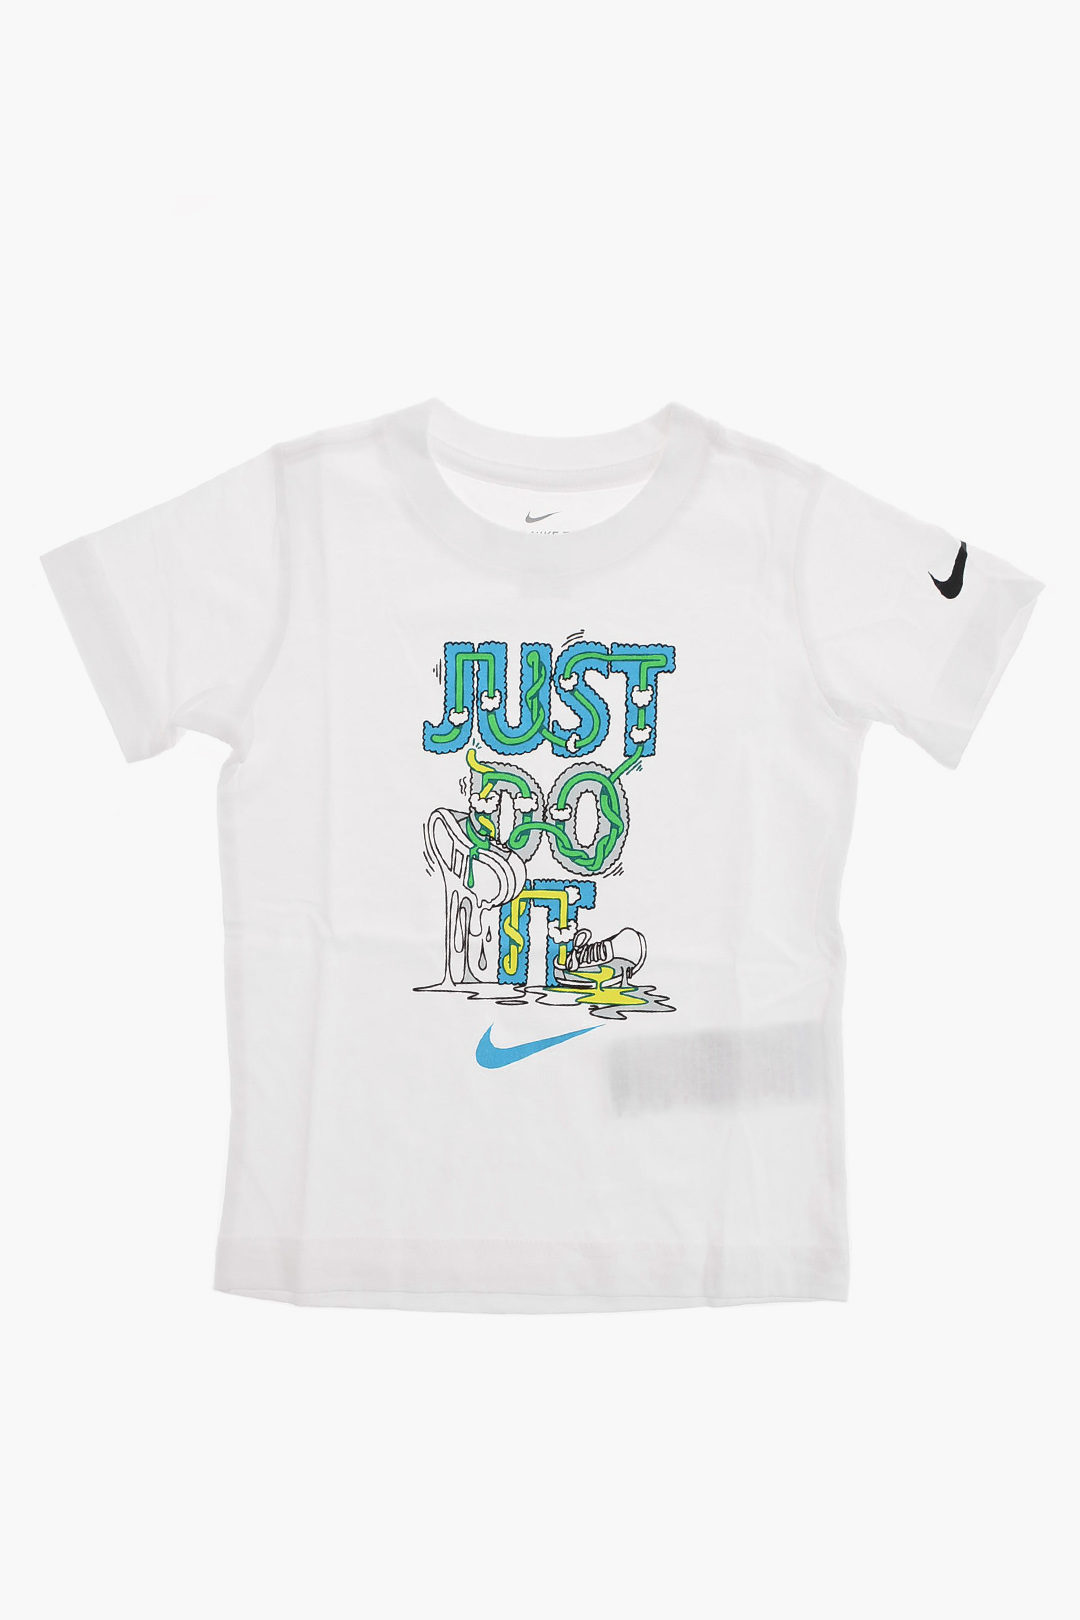 Nike Jersey T-shirt JUST DO IT boys - Outlet